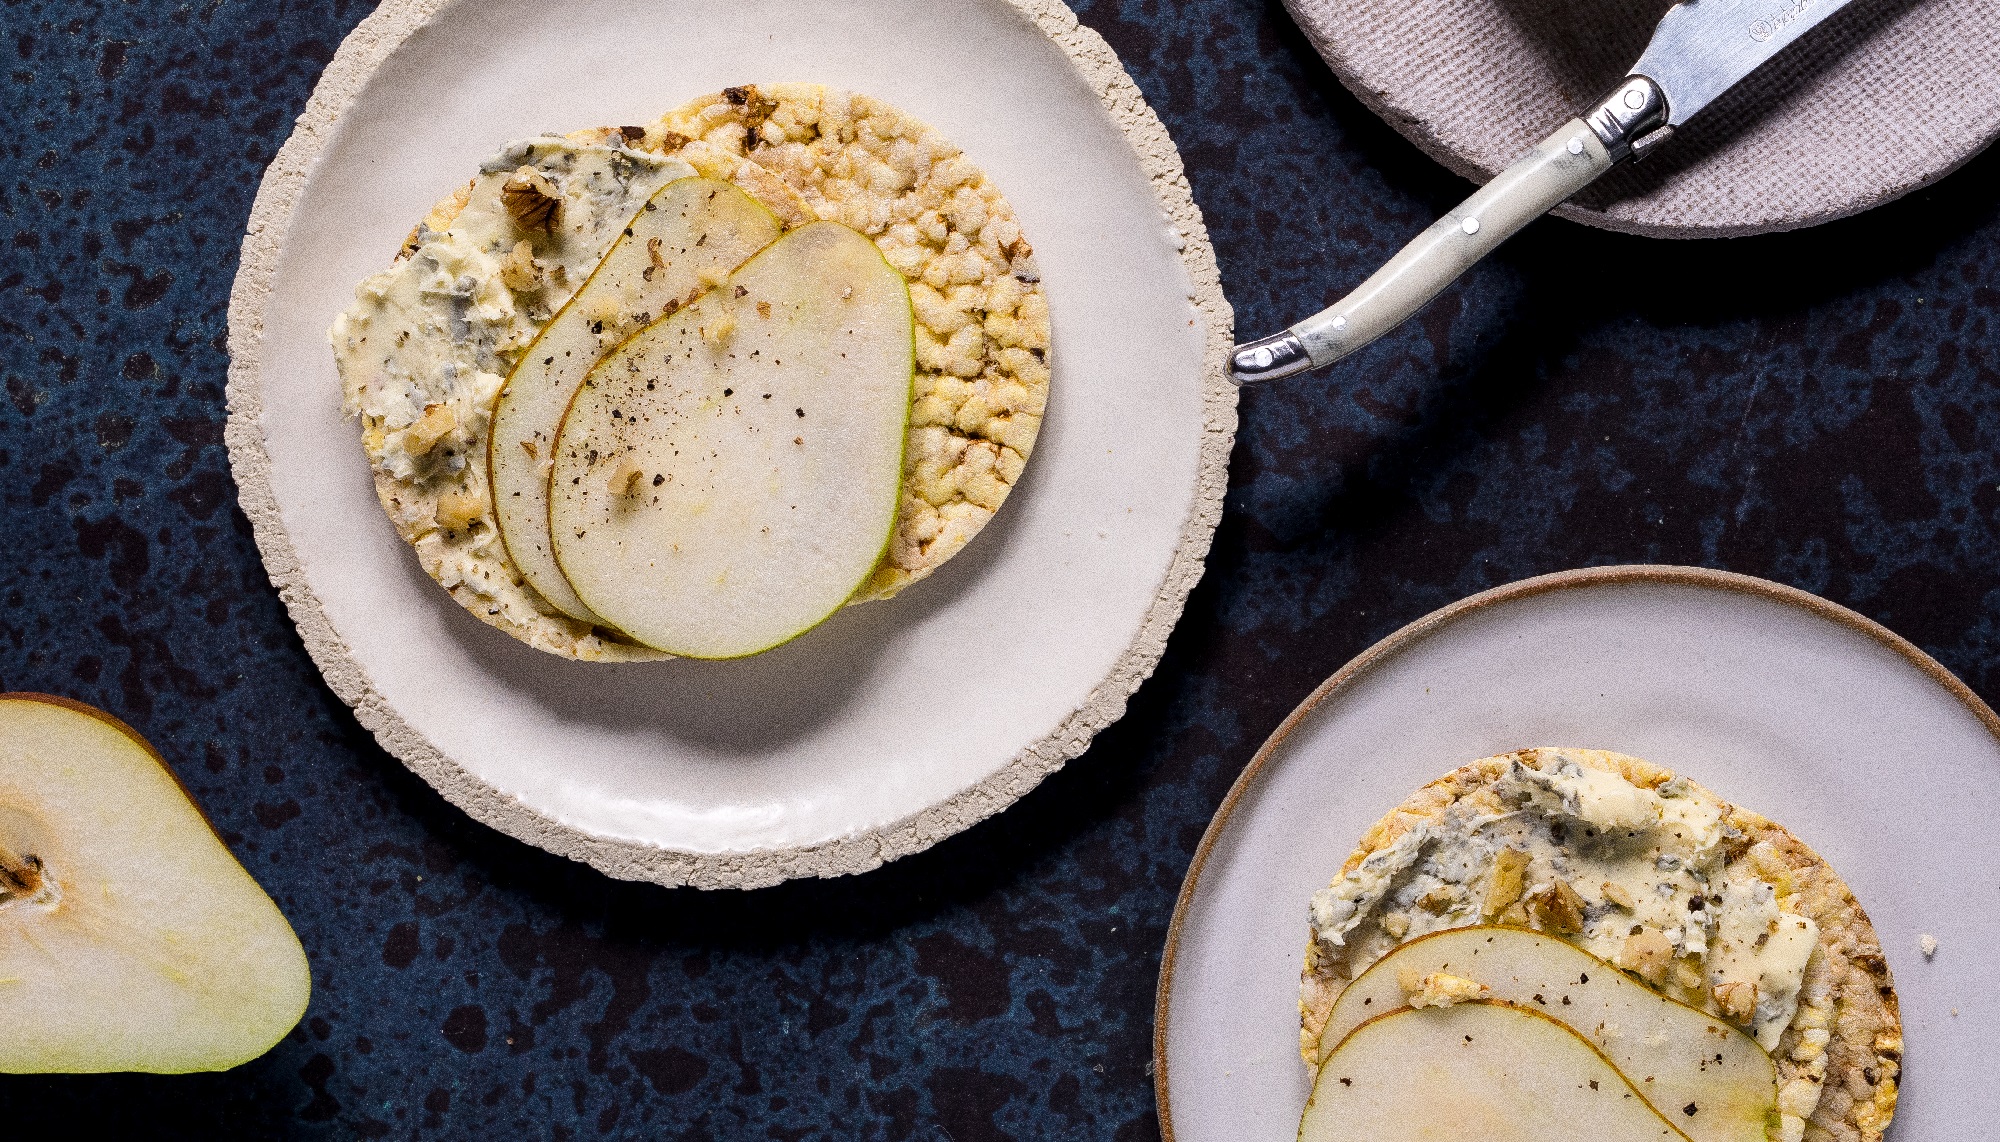 Blue Cheese, Pear & Walnut on CORN THINS slices